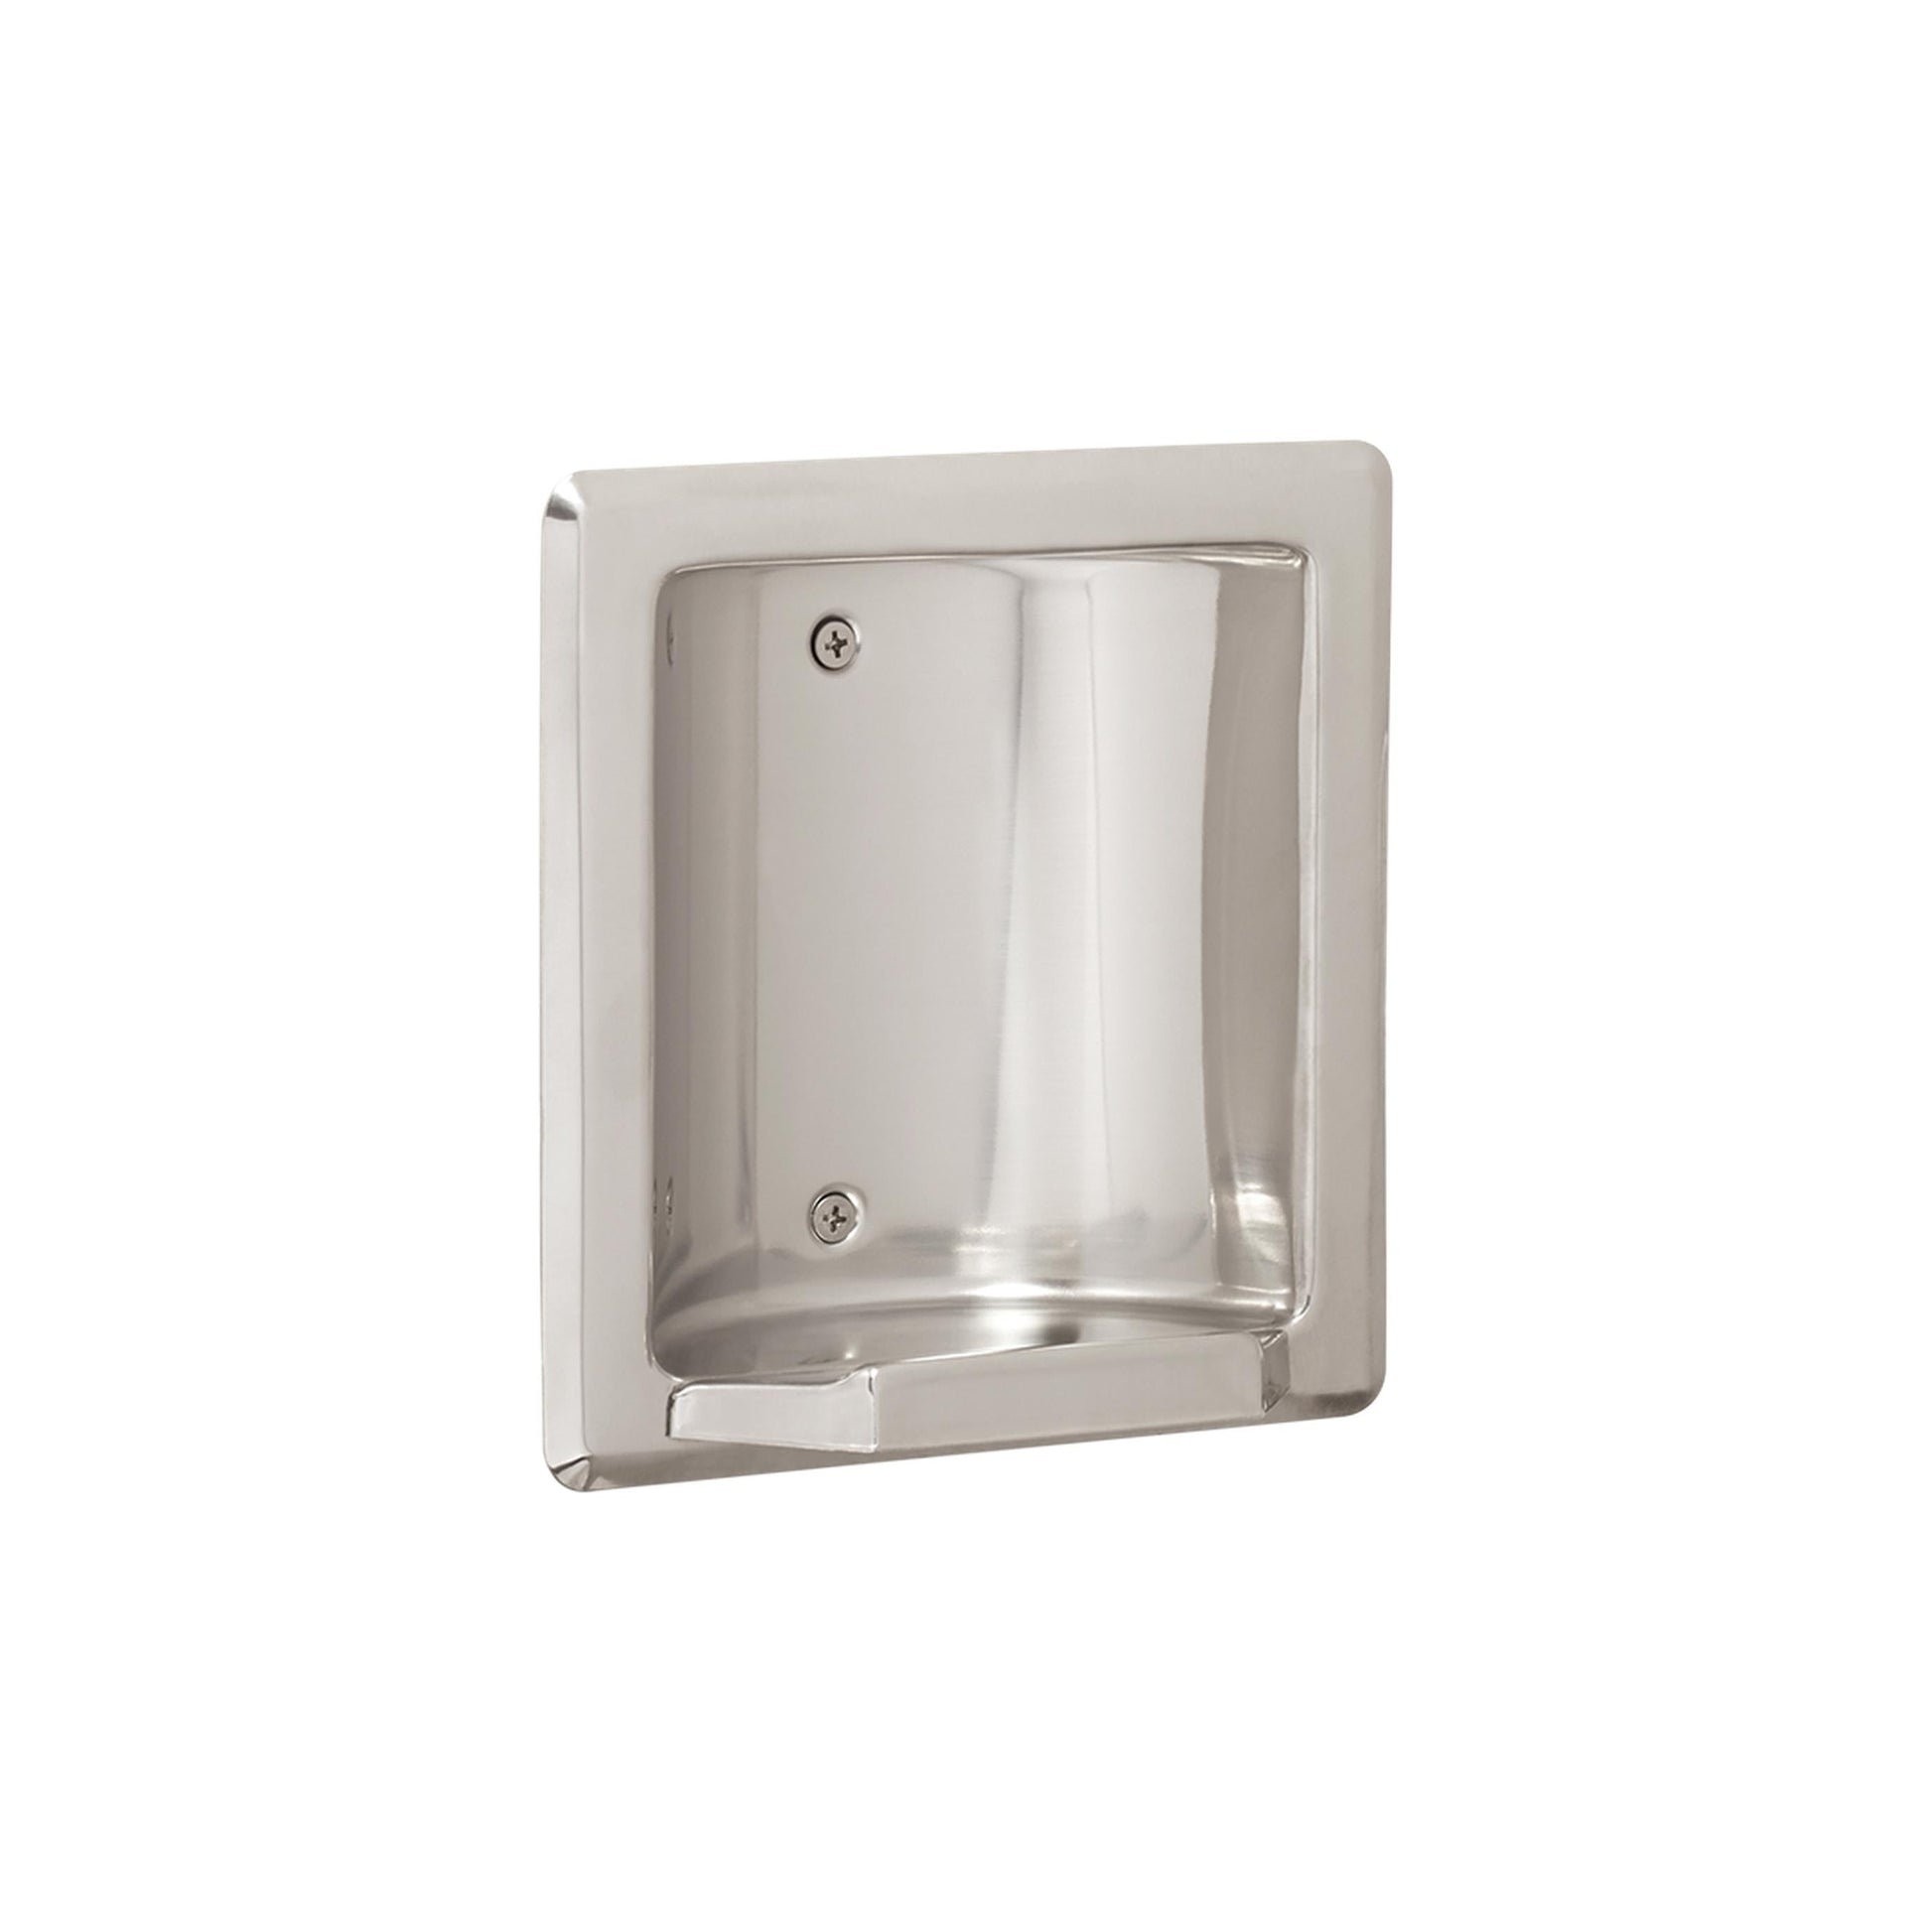 Seachrome Cal Series Recessed Soap and Tumbler Holder with Metal Lip in Polished Stainless Steel Finish